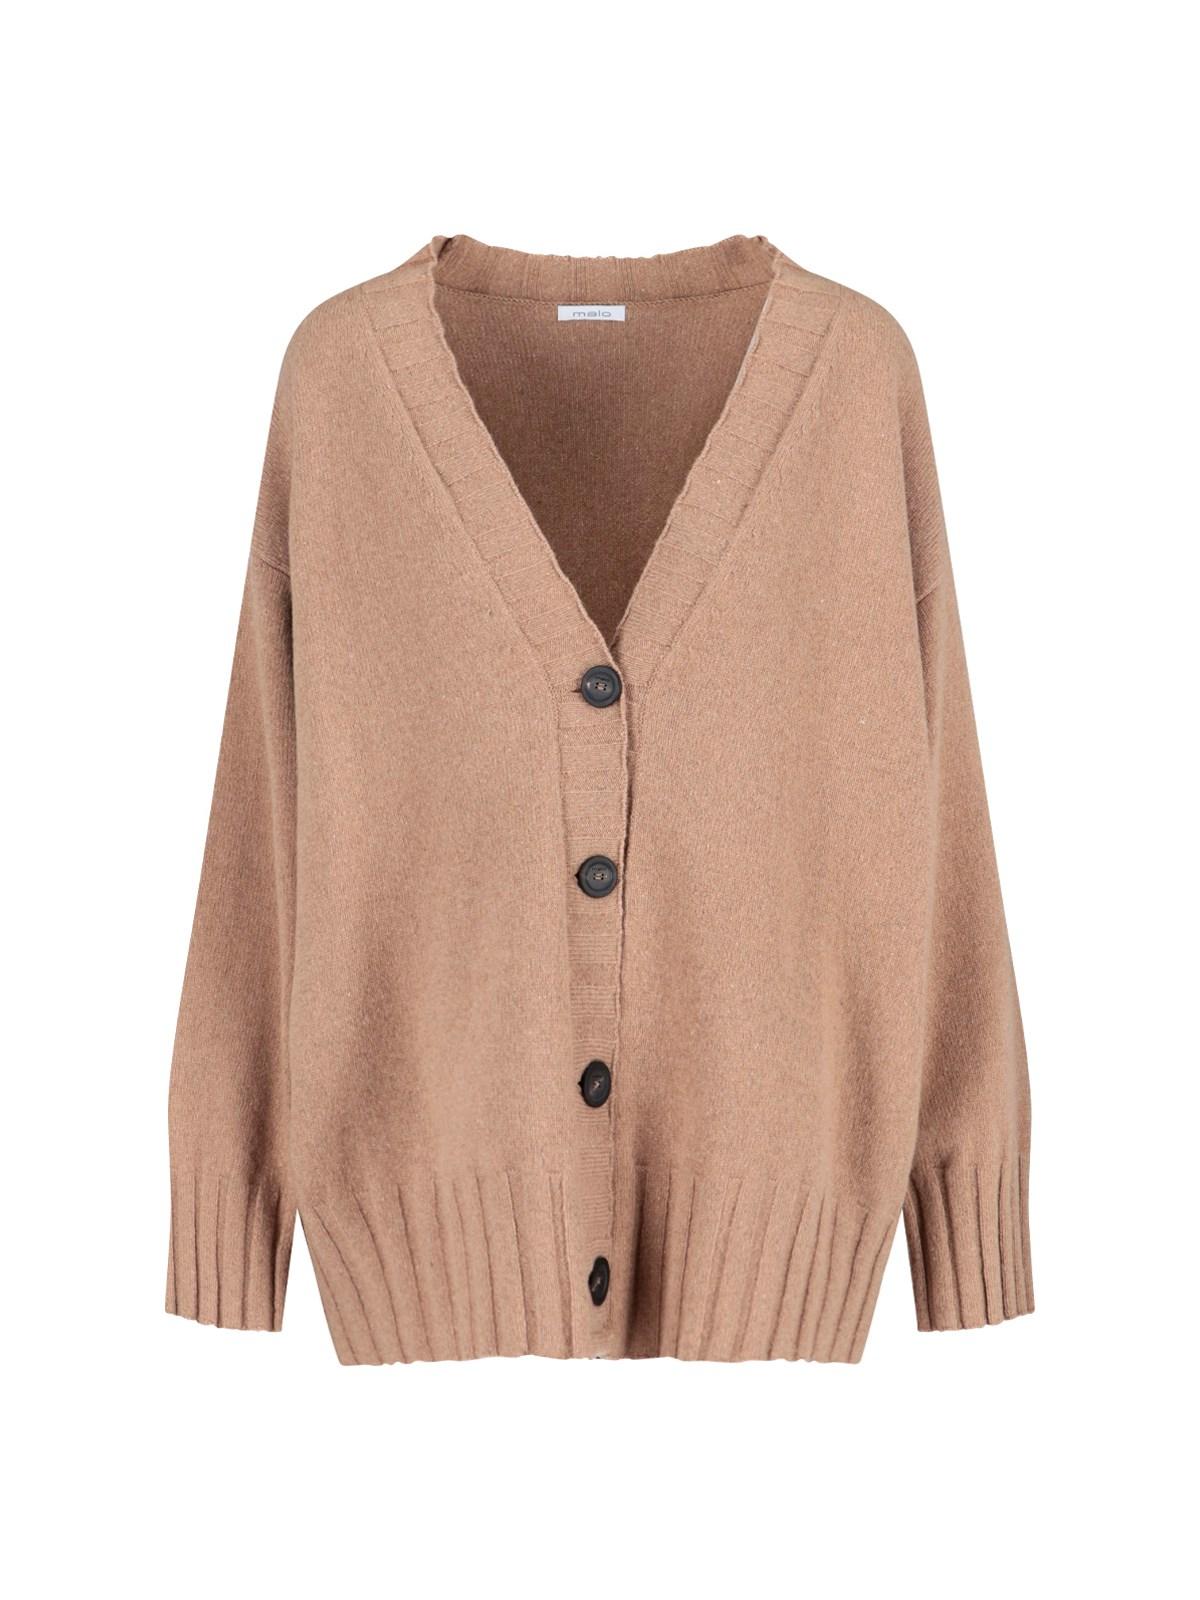 Malo V-neck Cardigan in Natural | Lyst